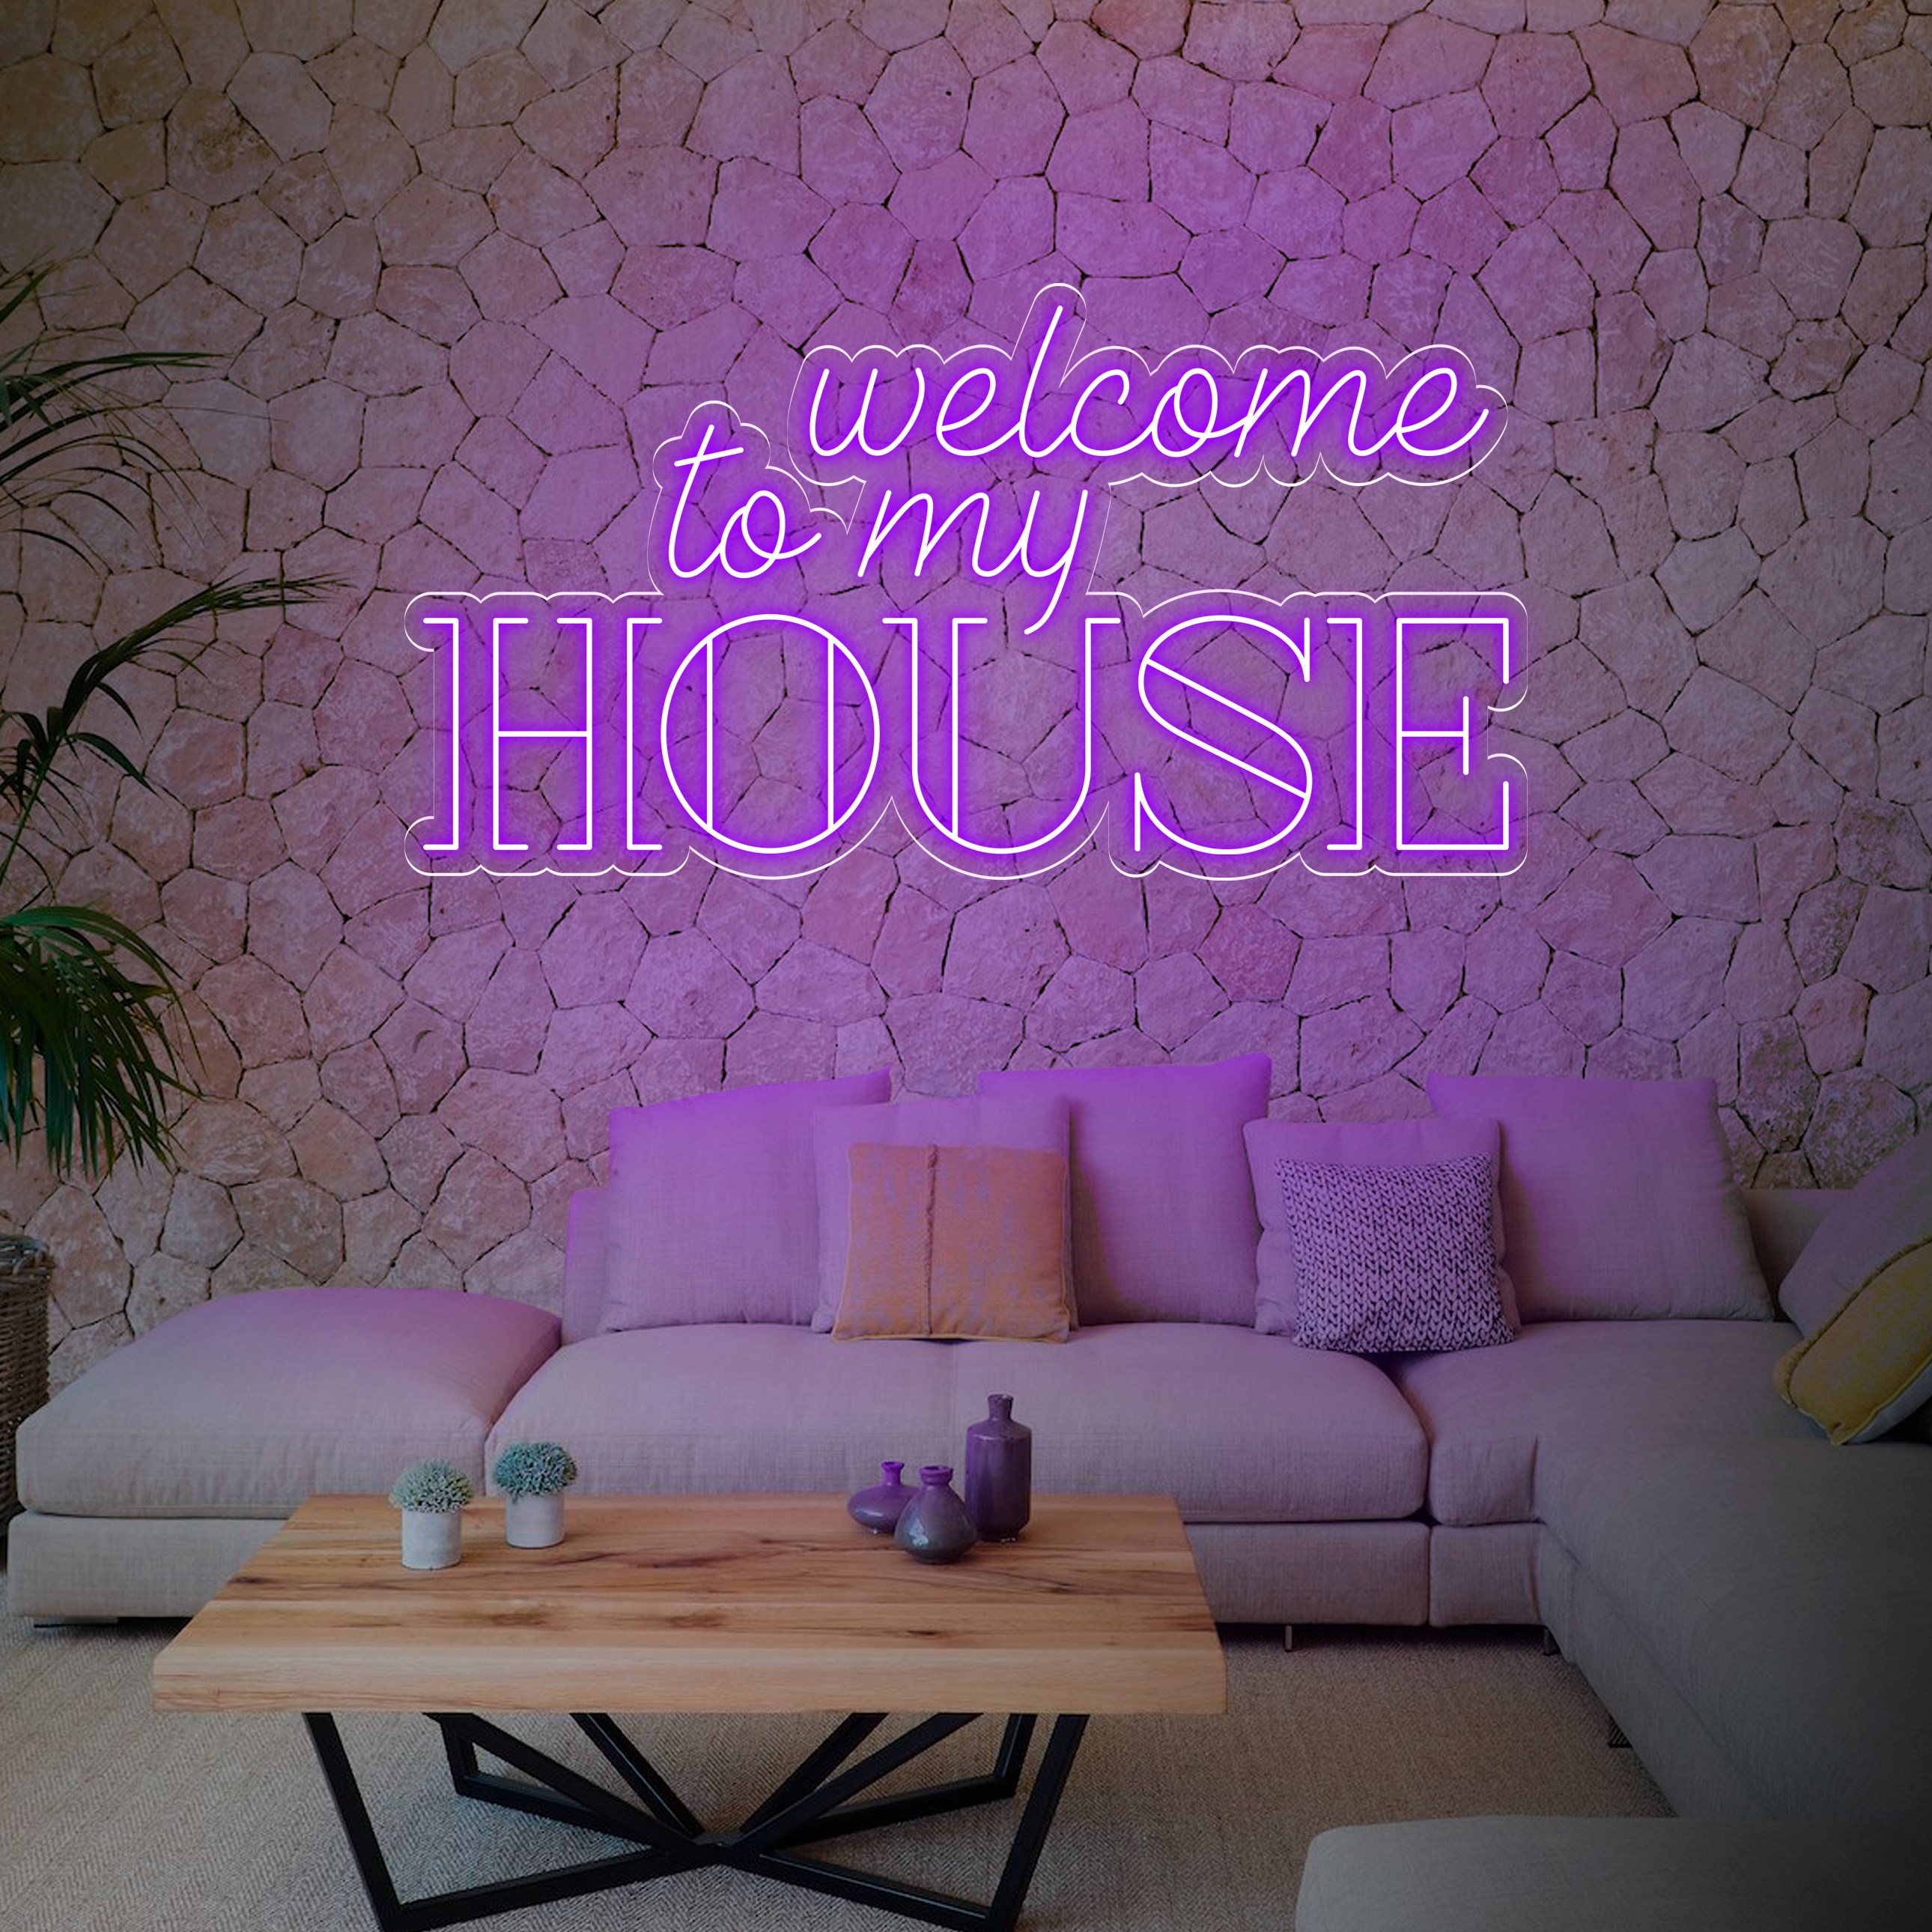 Image de Néon "Welcome To My House"